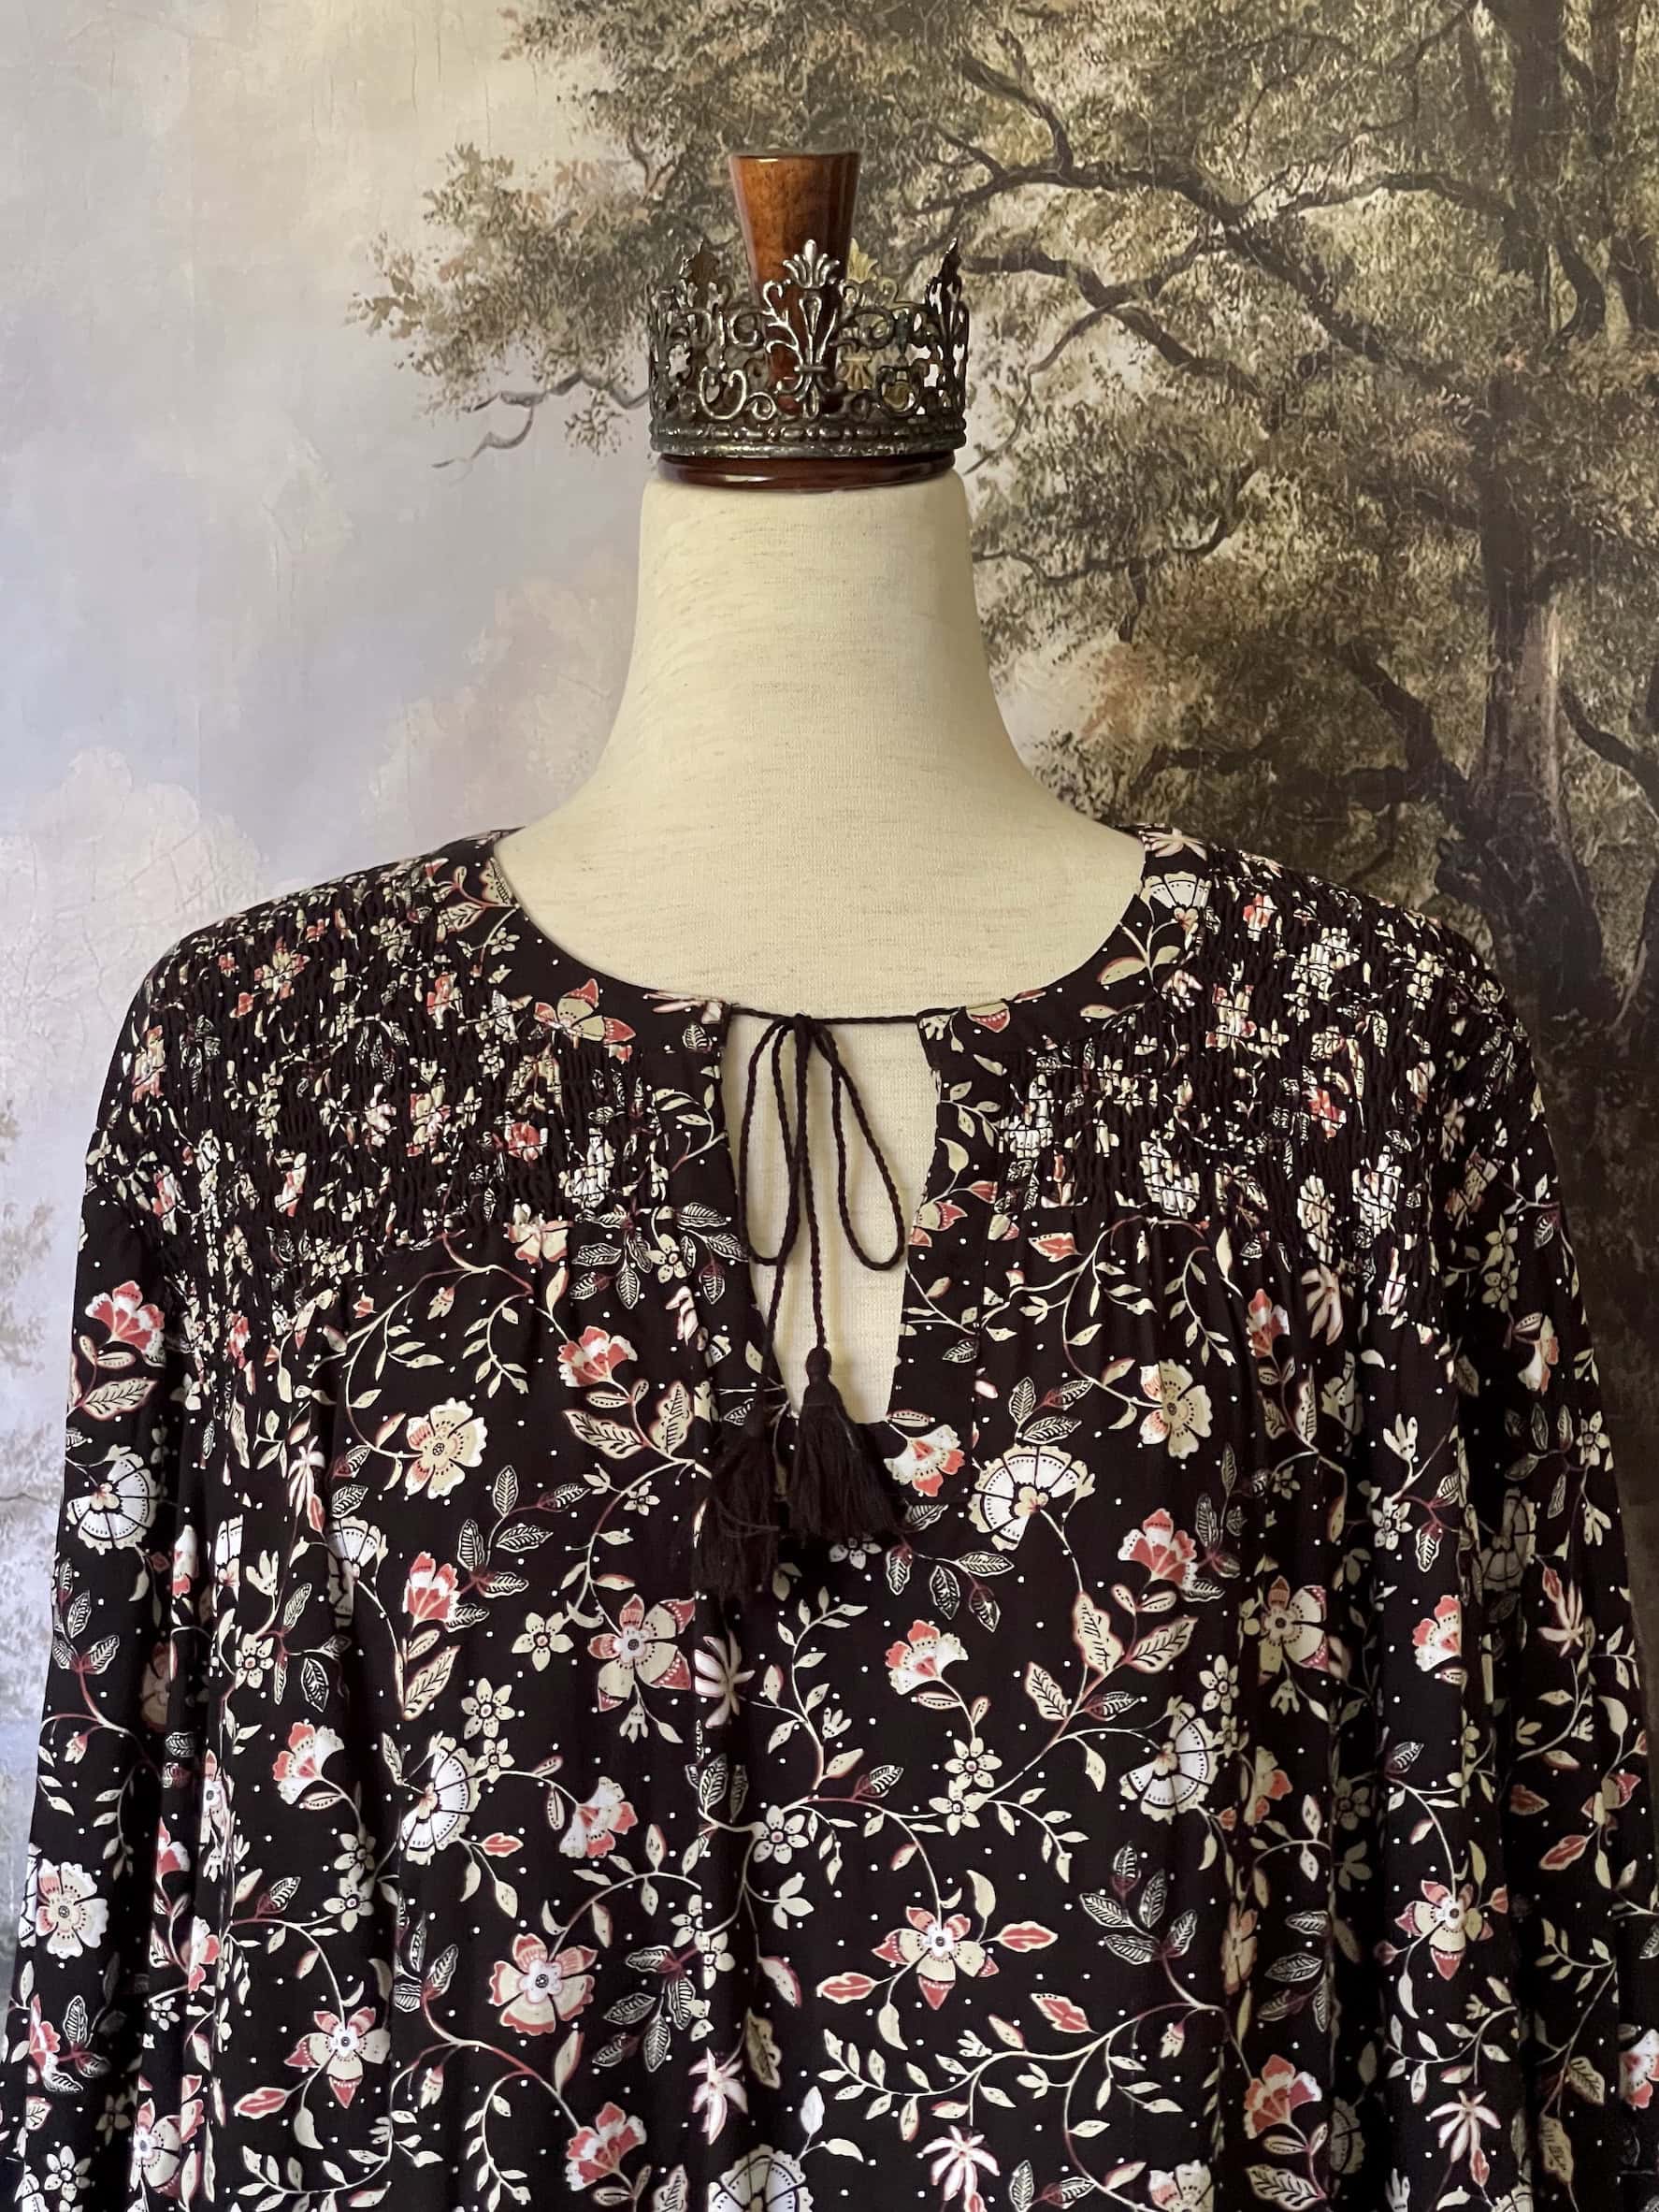 A Medieval Inspired Dark Botanical Print Blouse with Bishop Sleeves on a mannequin in front of a forested painting backdrop.